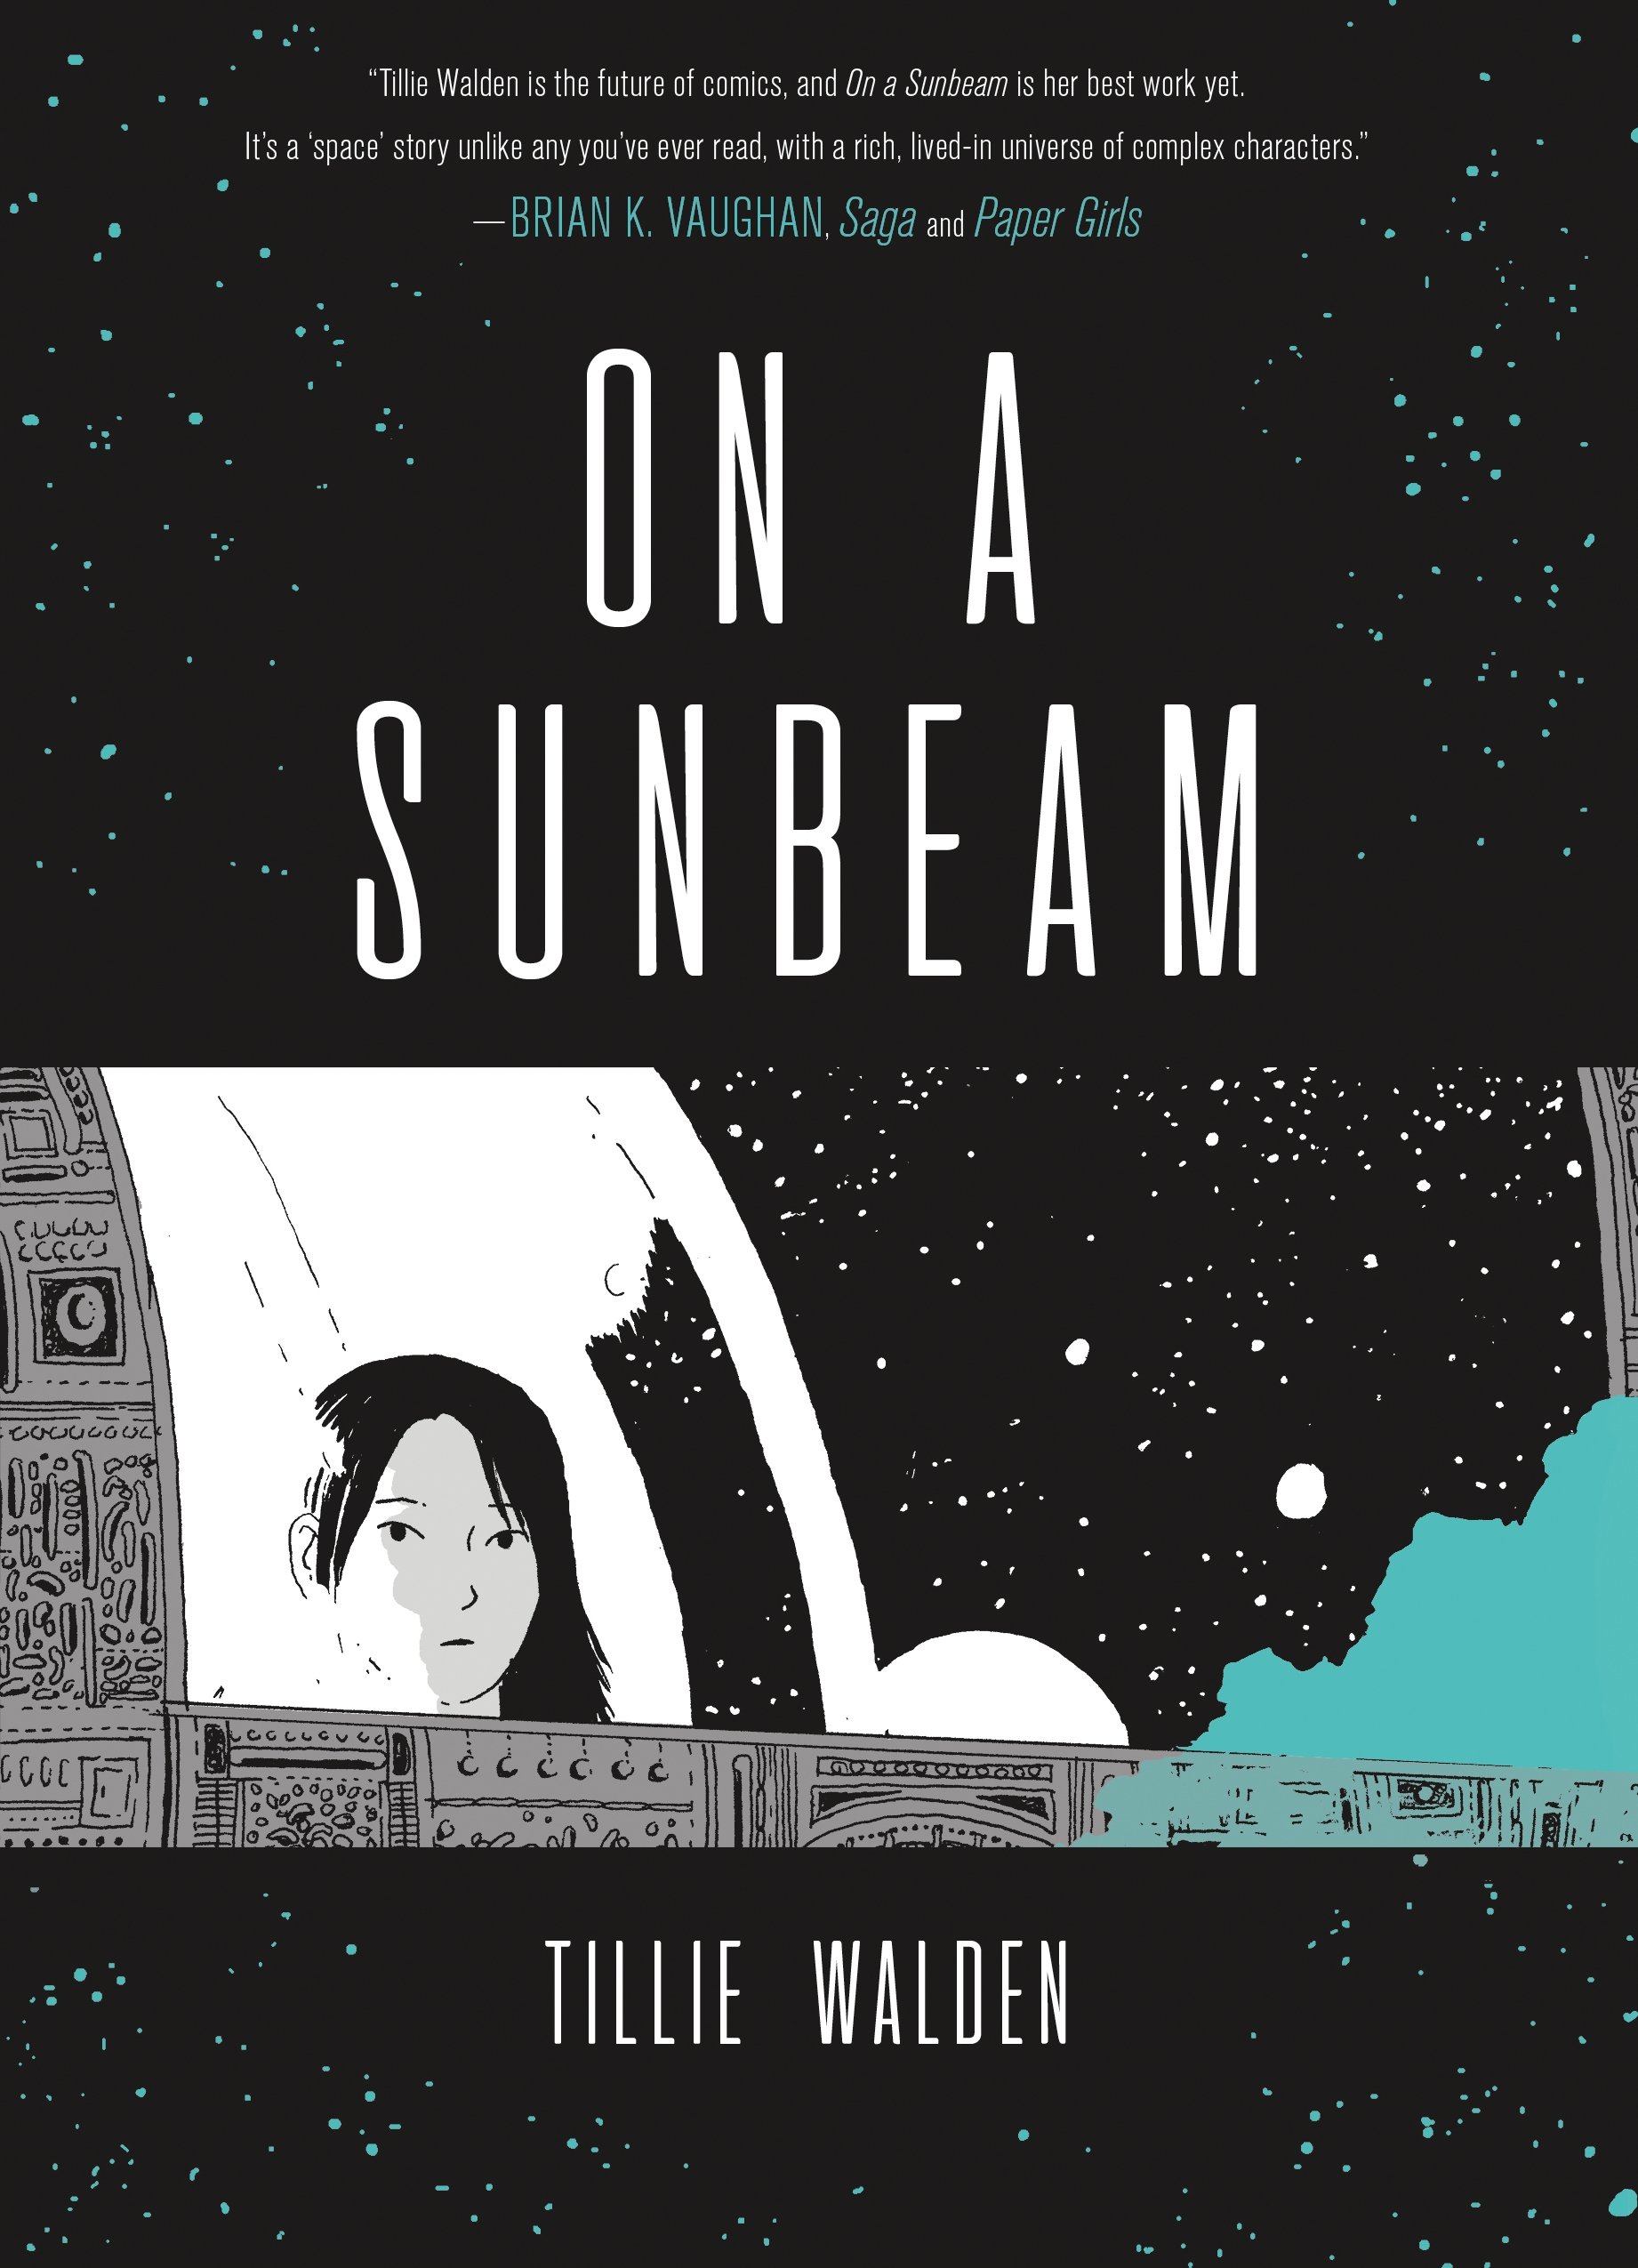 Book Cover of "On a Sunbeam" by Tillie Walden